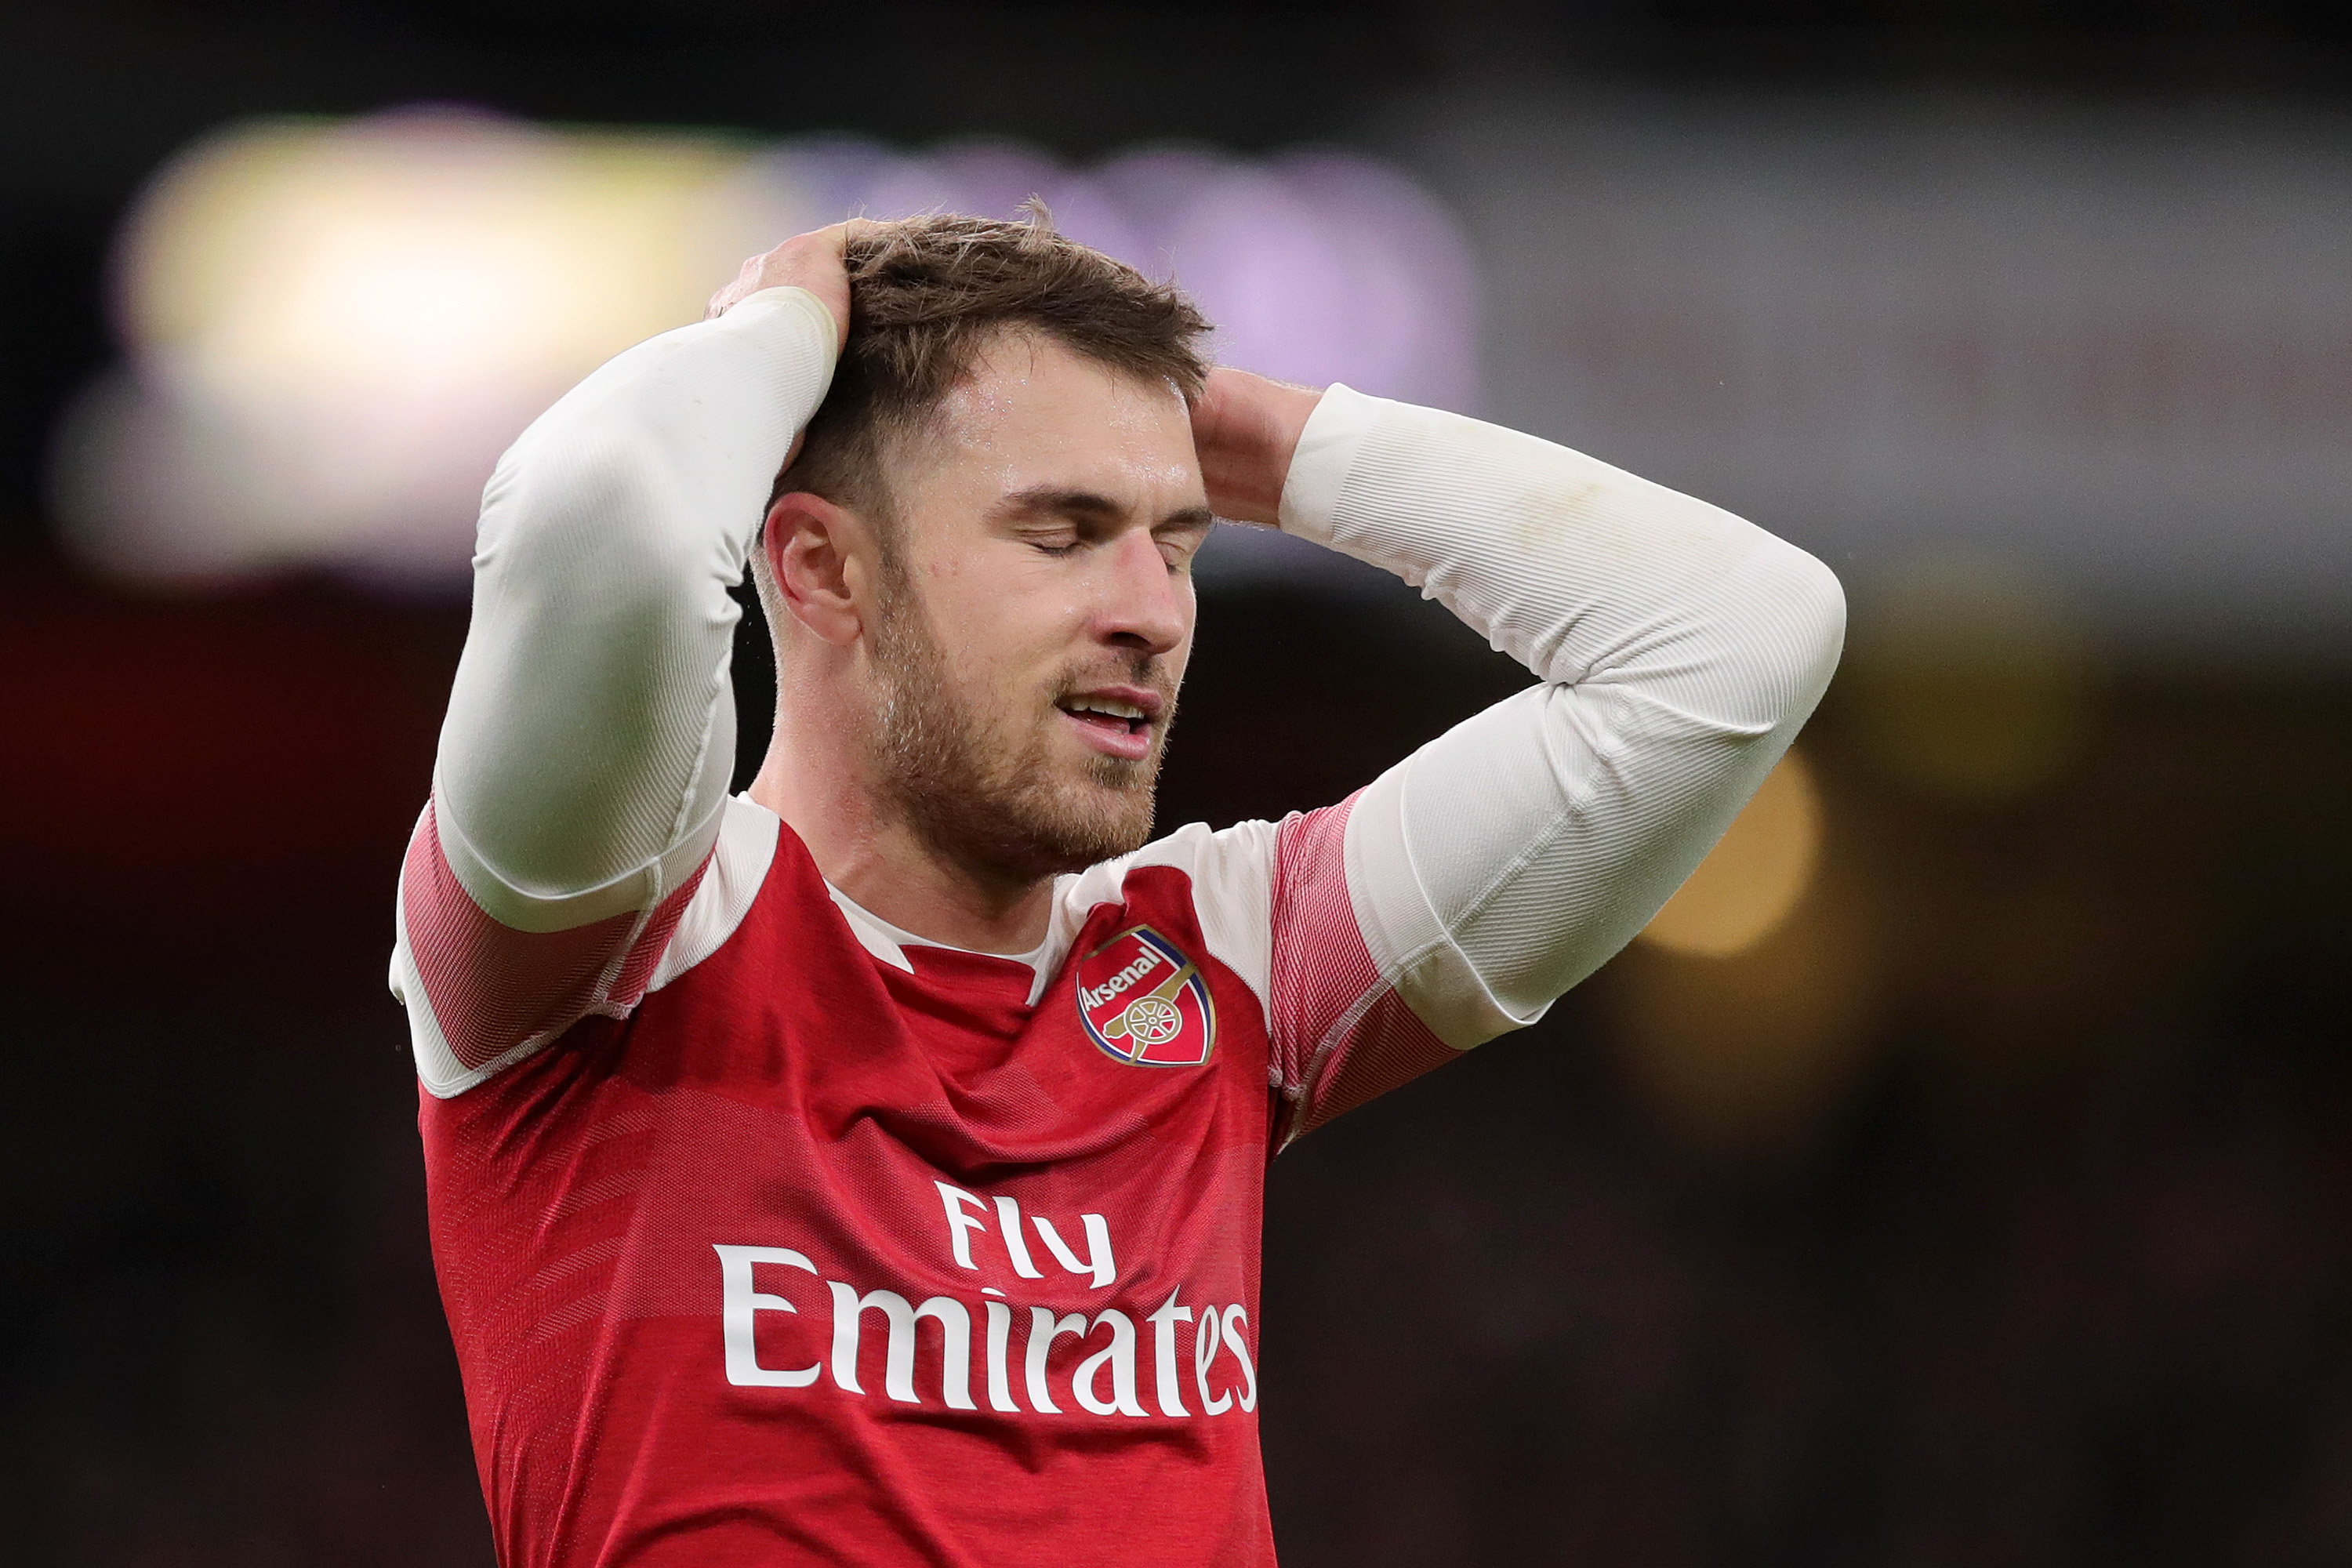 LONDON, ENGLAND - DECEMBER 19:  Aaron Ramsey of Arsenal reacts after a missed chance during the Carabao Cup Quarter Final match between Arsenal and Tottenham Hotspur at Emirates Stadium on December 19, 2018 in London, United Kingdom.  (Photo by Alex Morton/Getty Images)